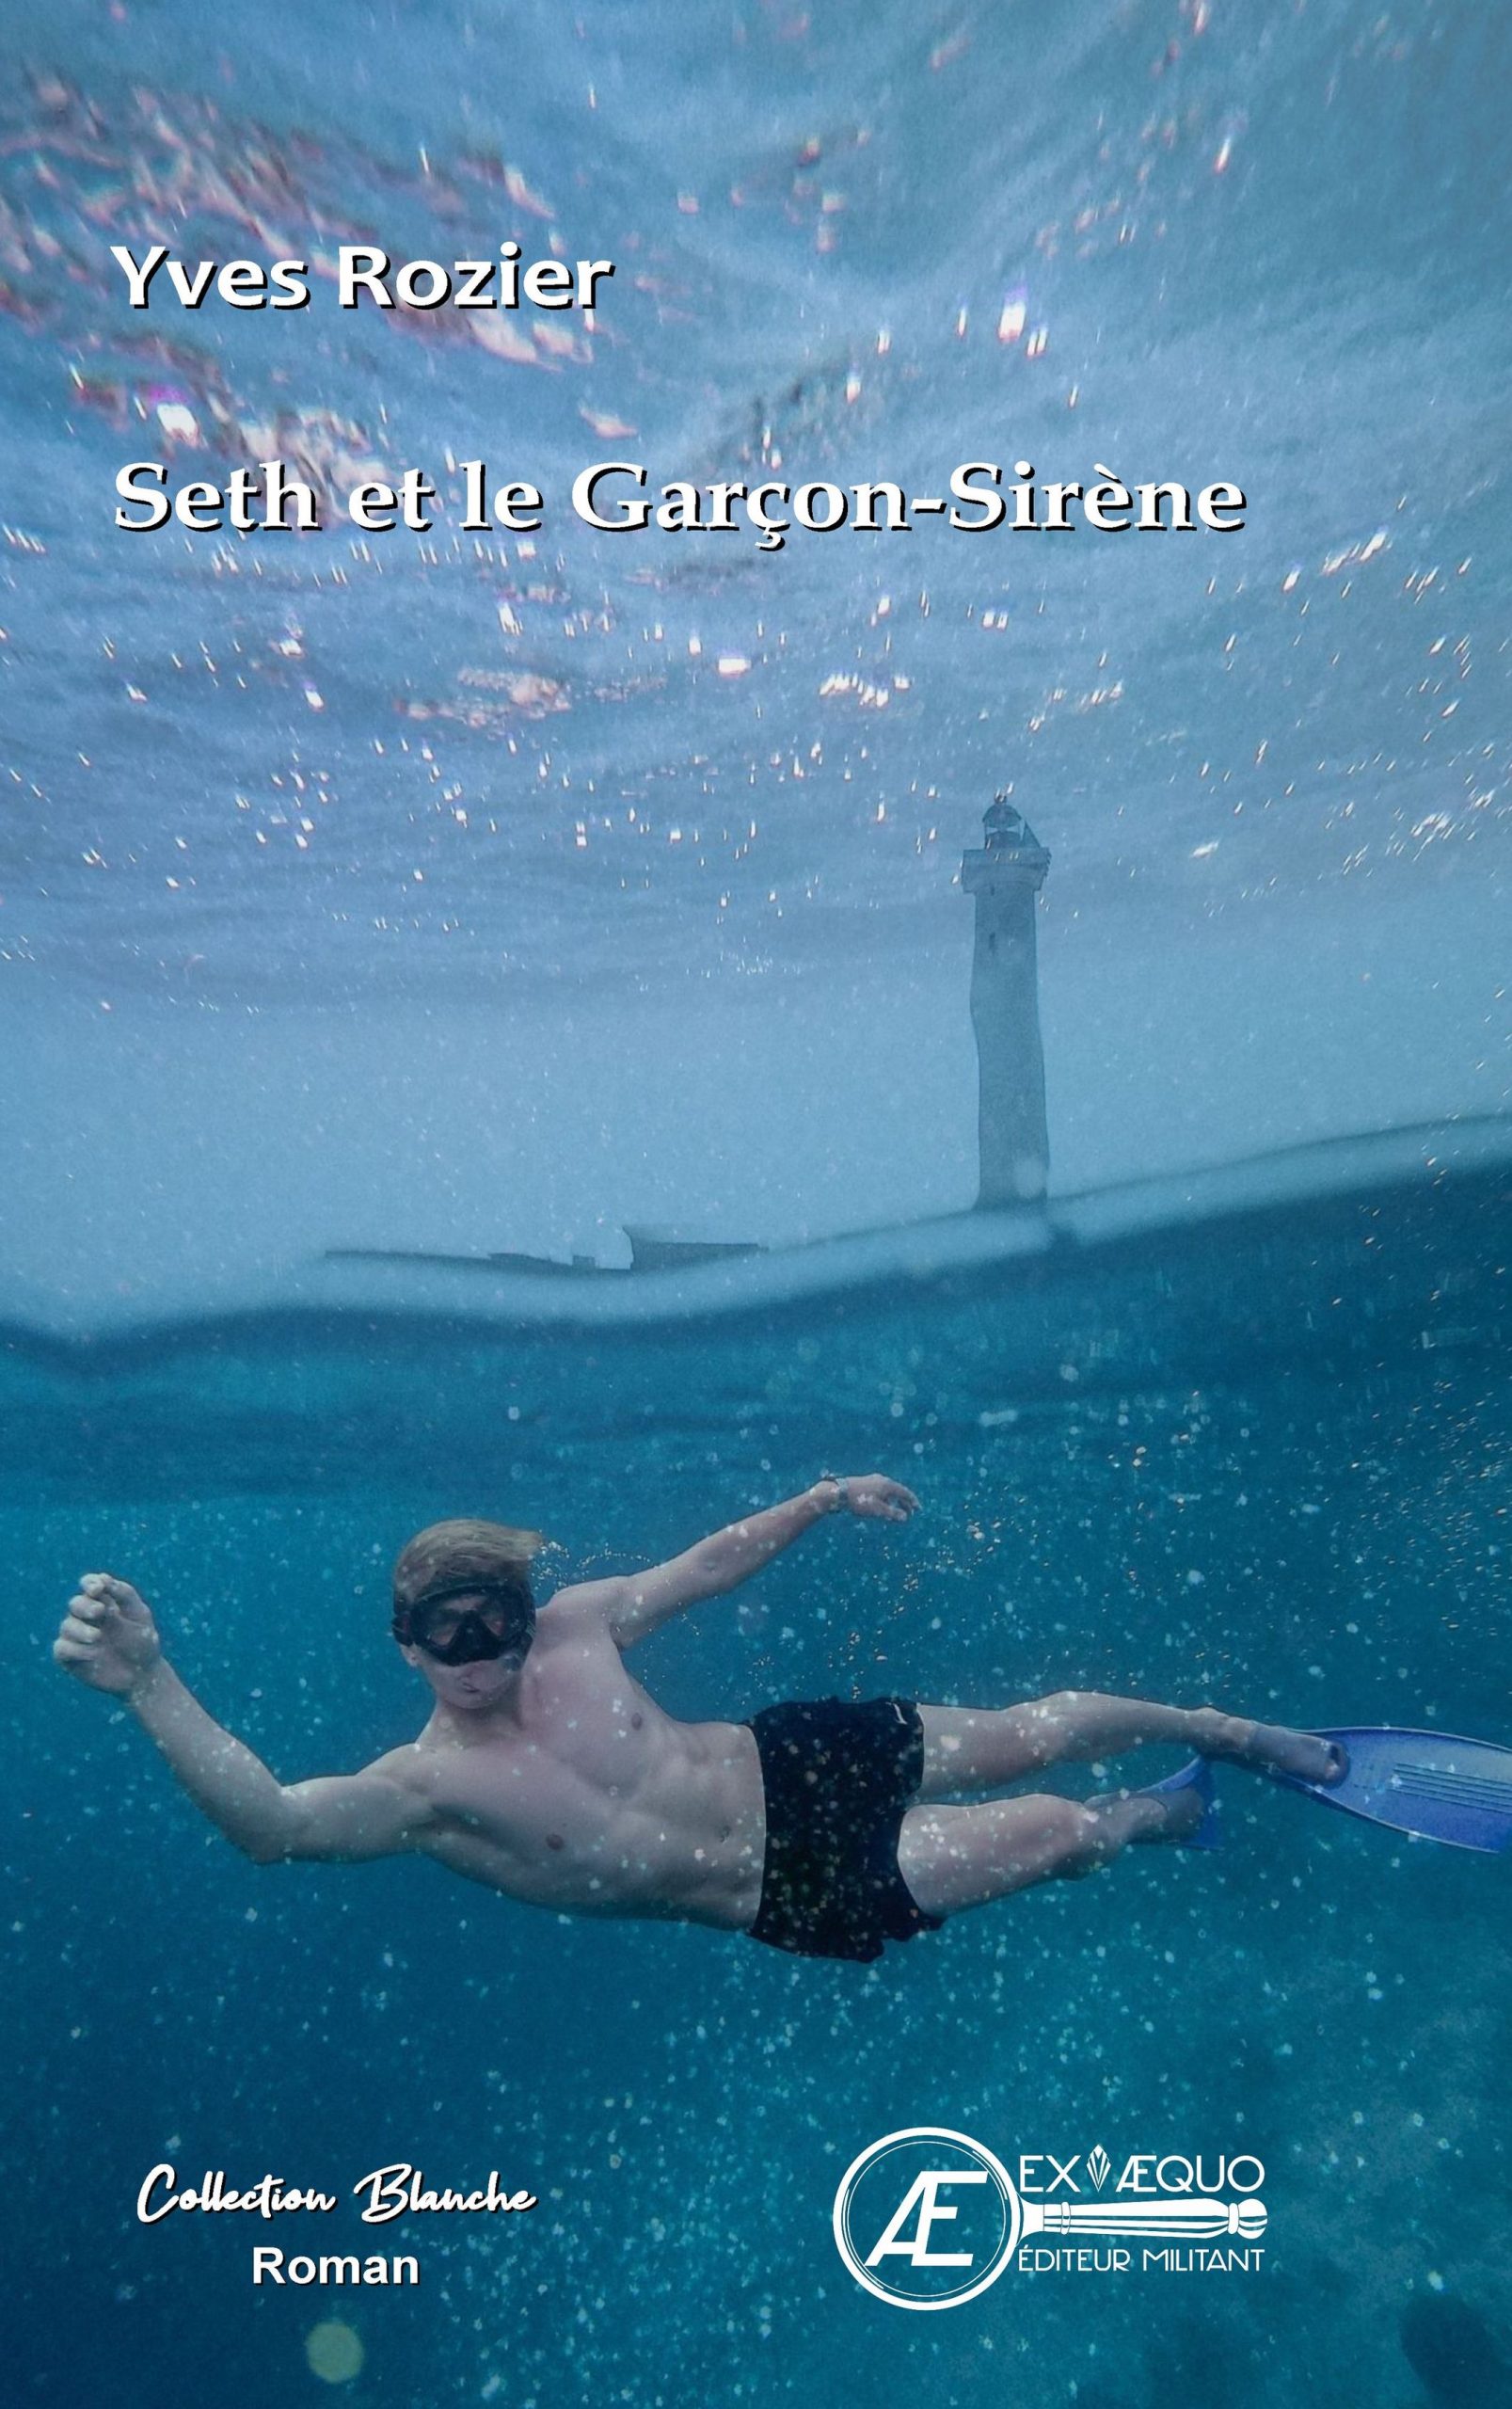 You are currently viewing Seth et le garçon-sirène, d’Yves Rozier